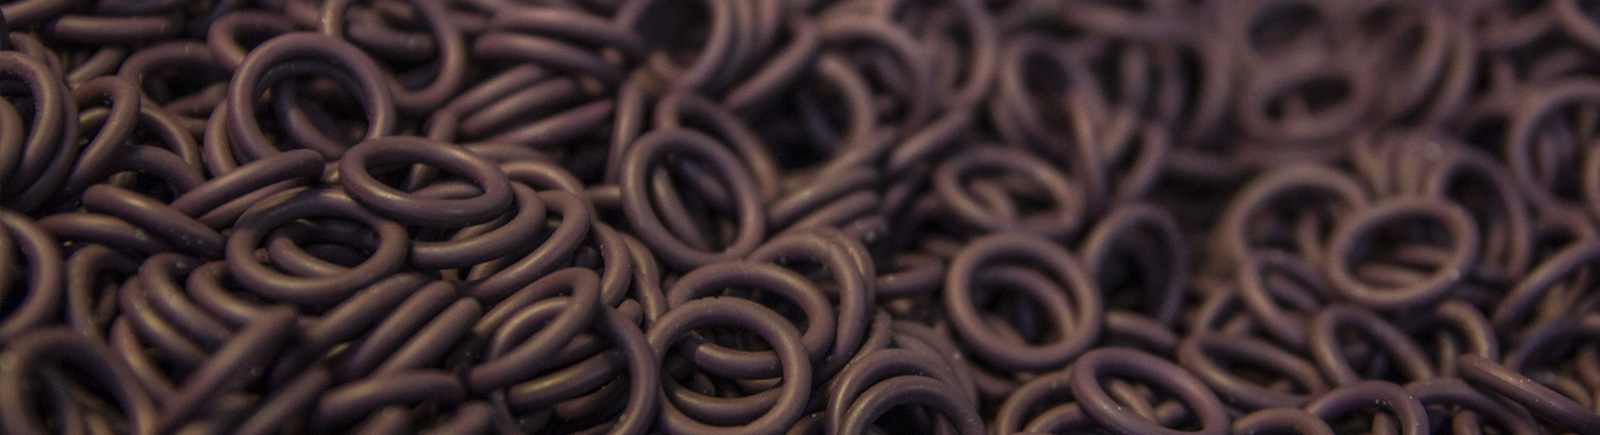 O-Rings with Nonstick Coating (PTFE), coated in mass coating